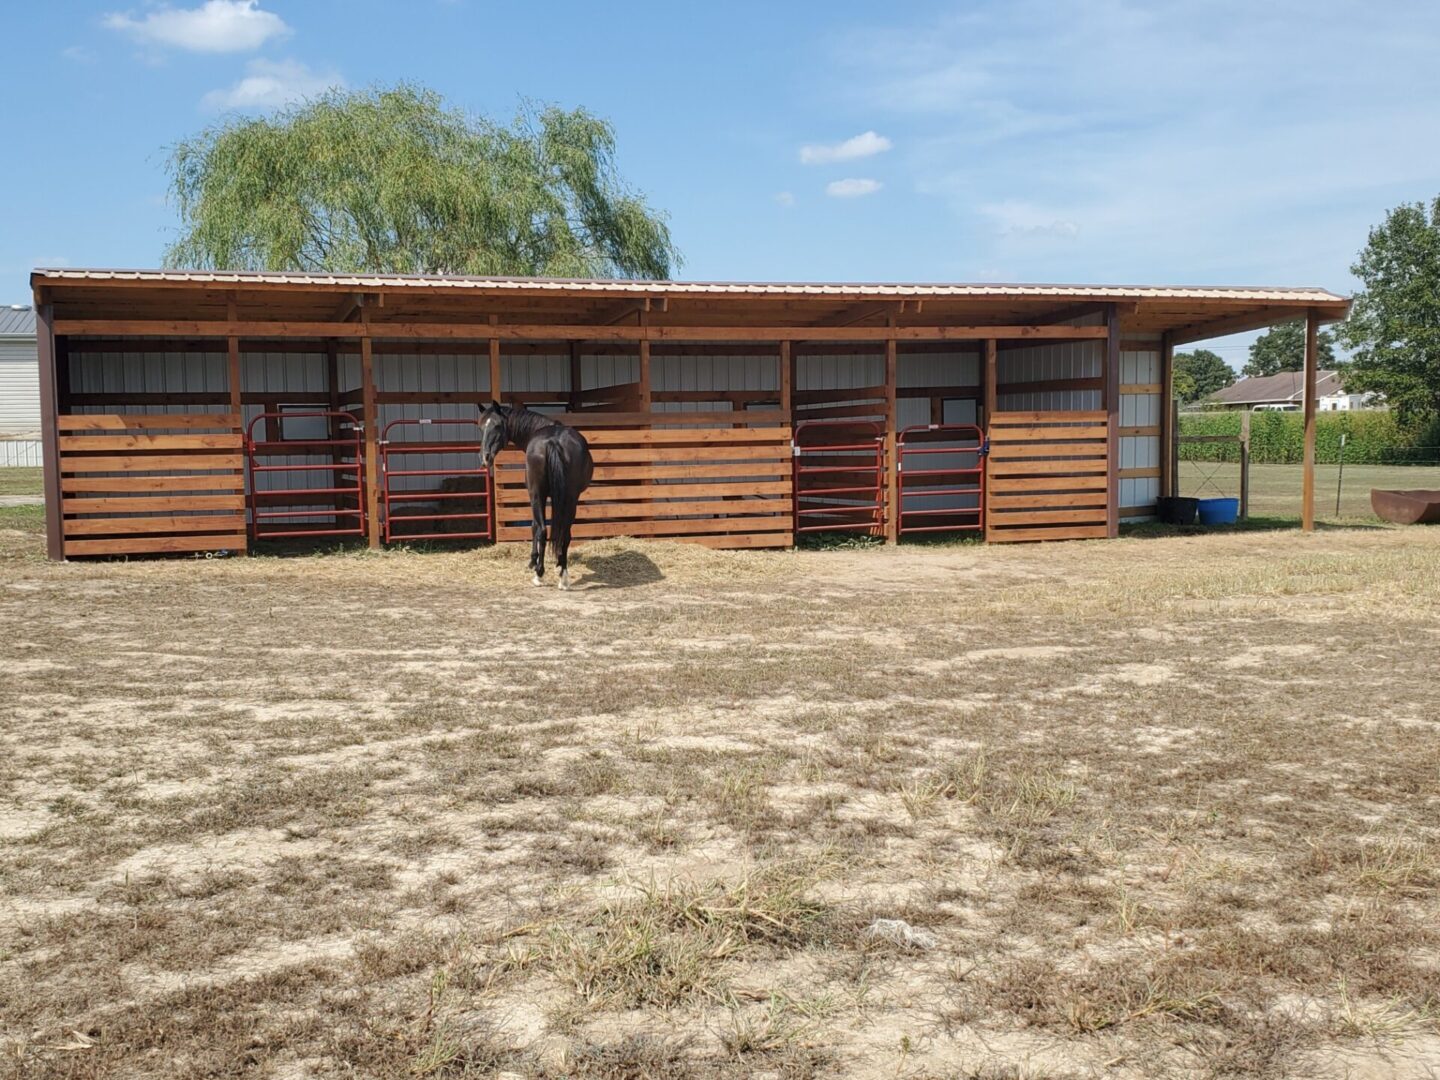 Horse stables in a field